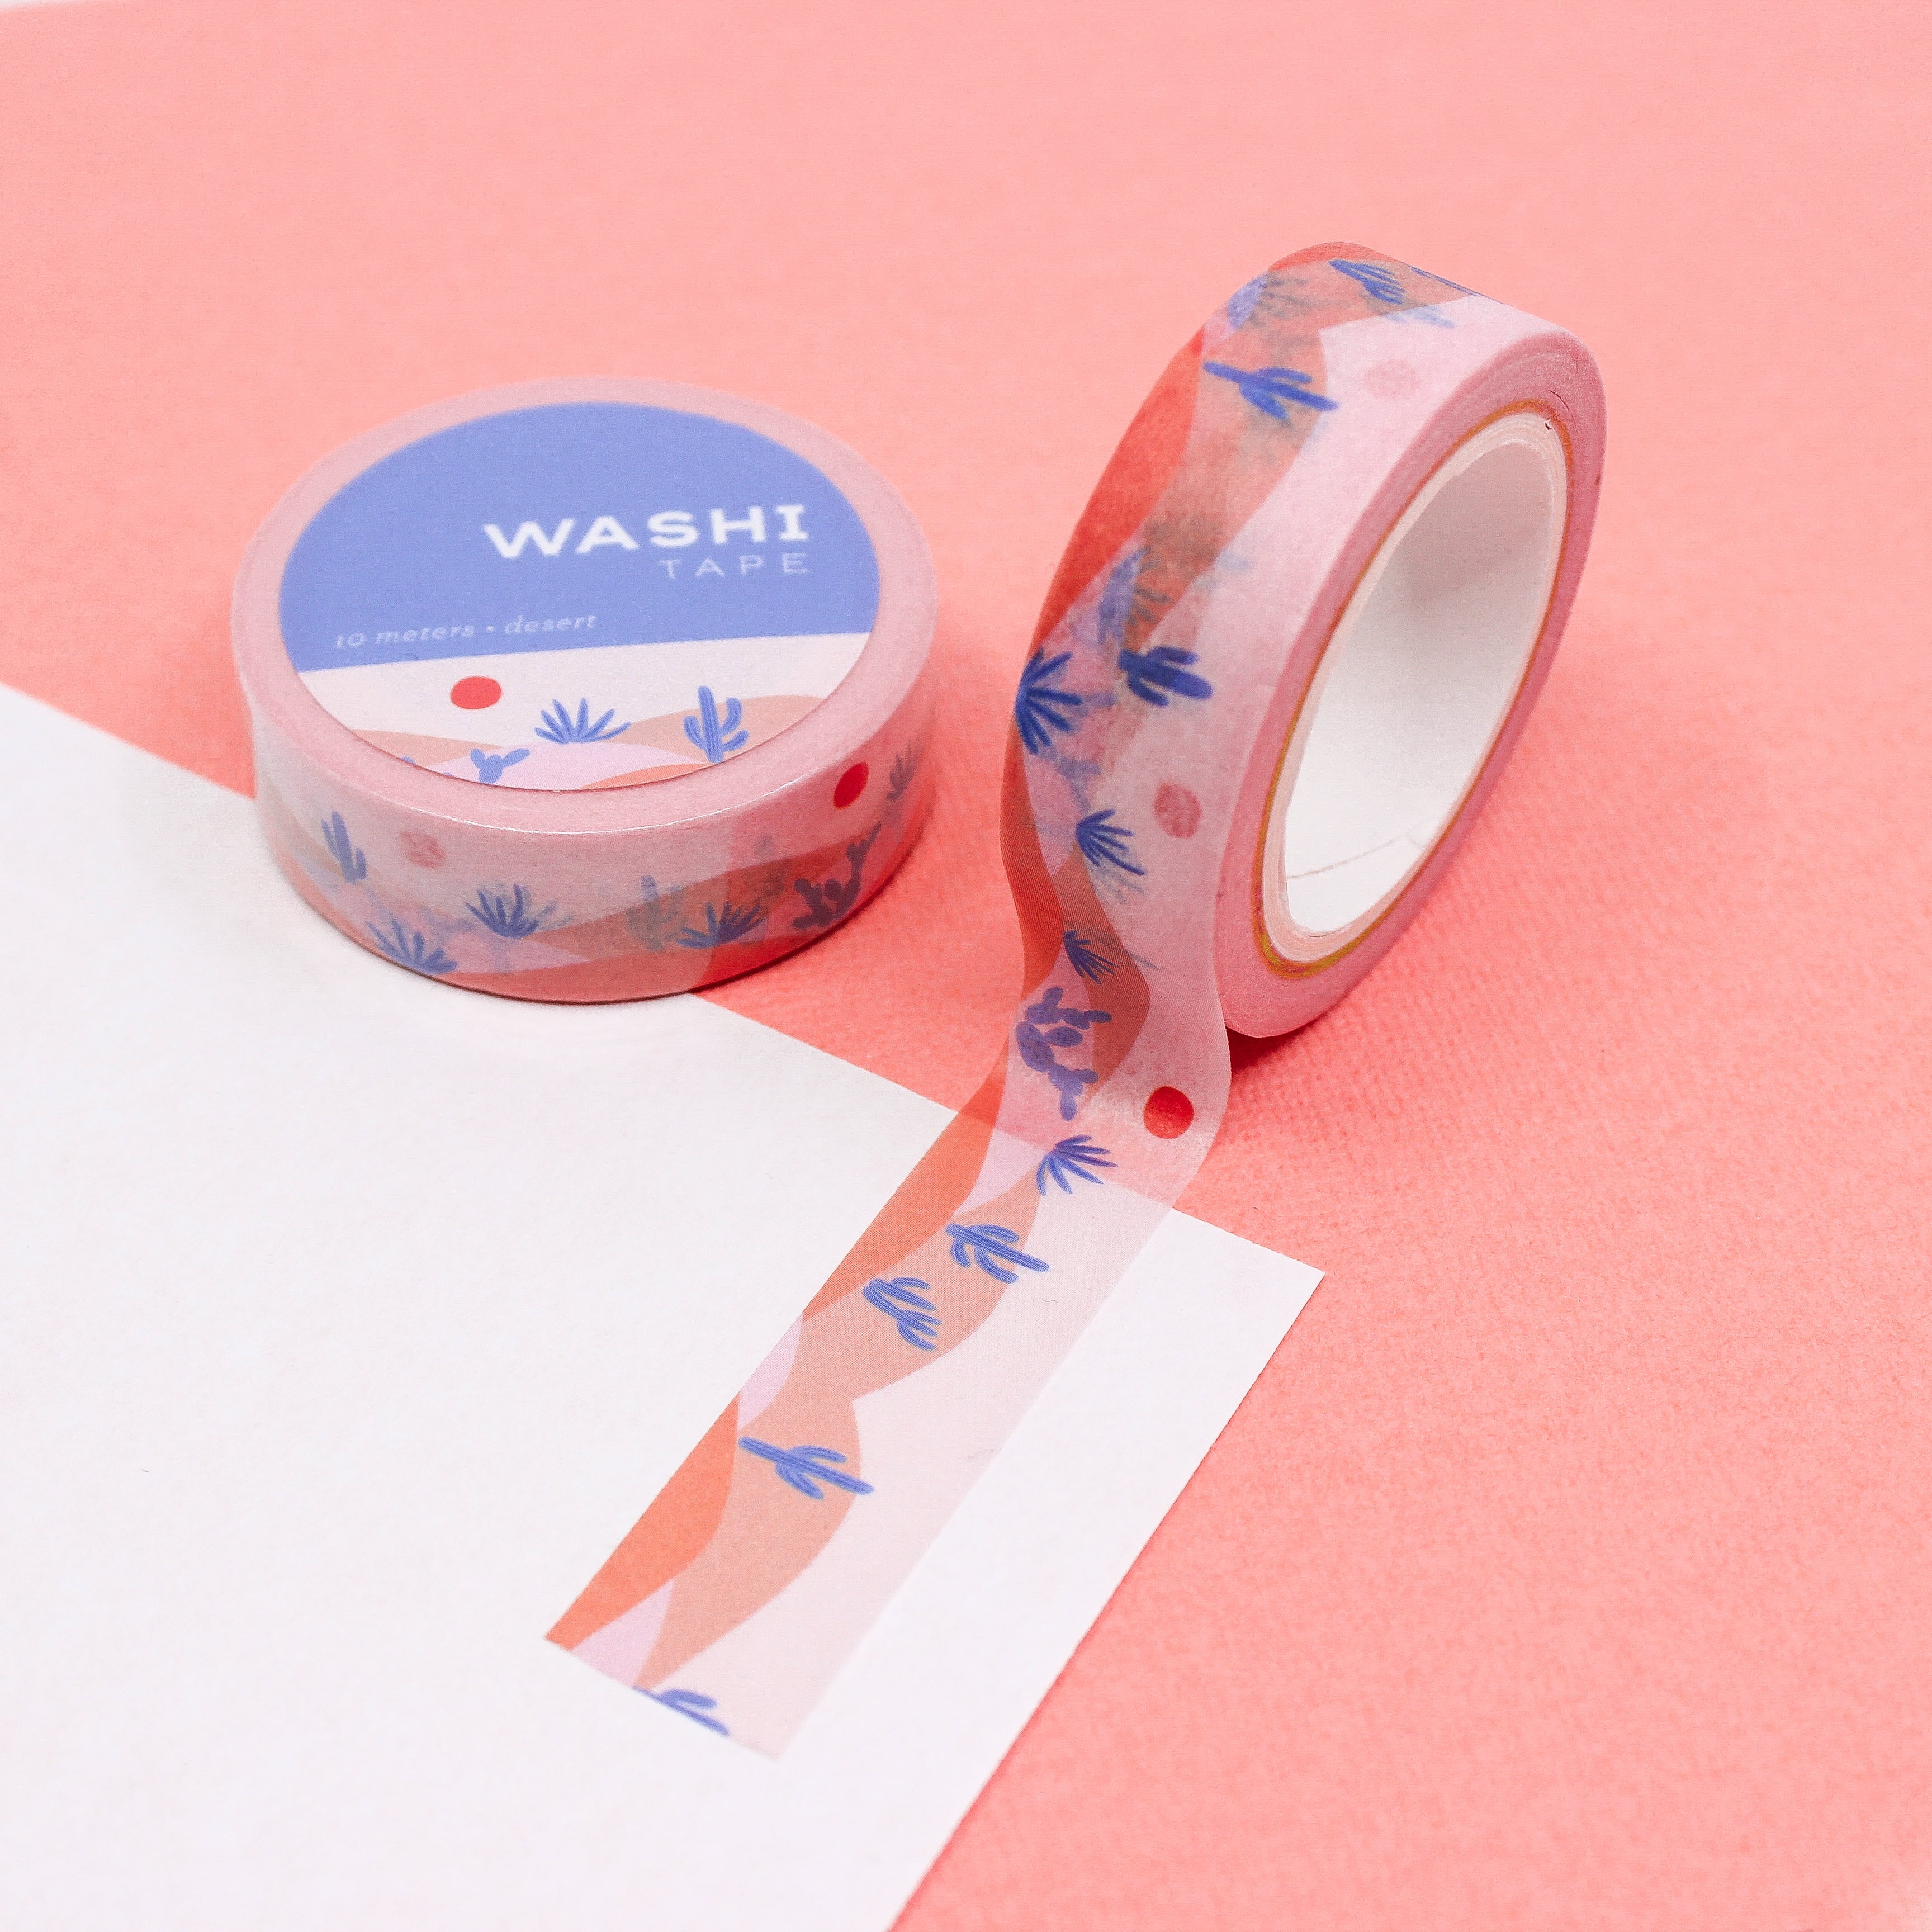 This is a purple and pink desert escape themed washi tape from BBB Supplies Craft Shop